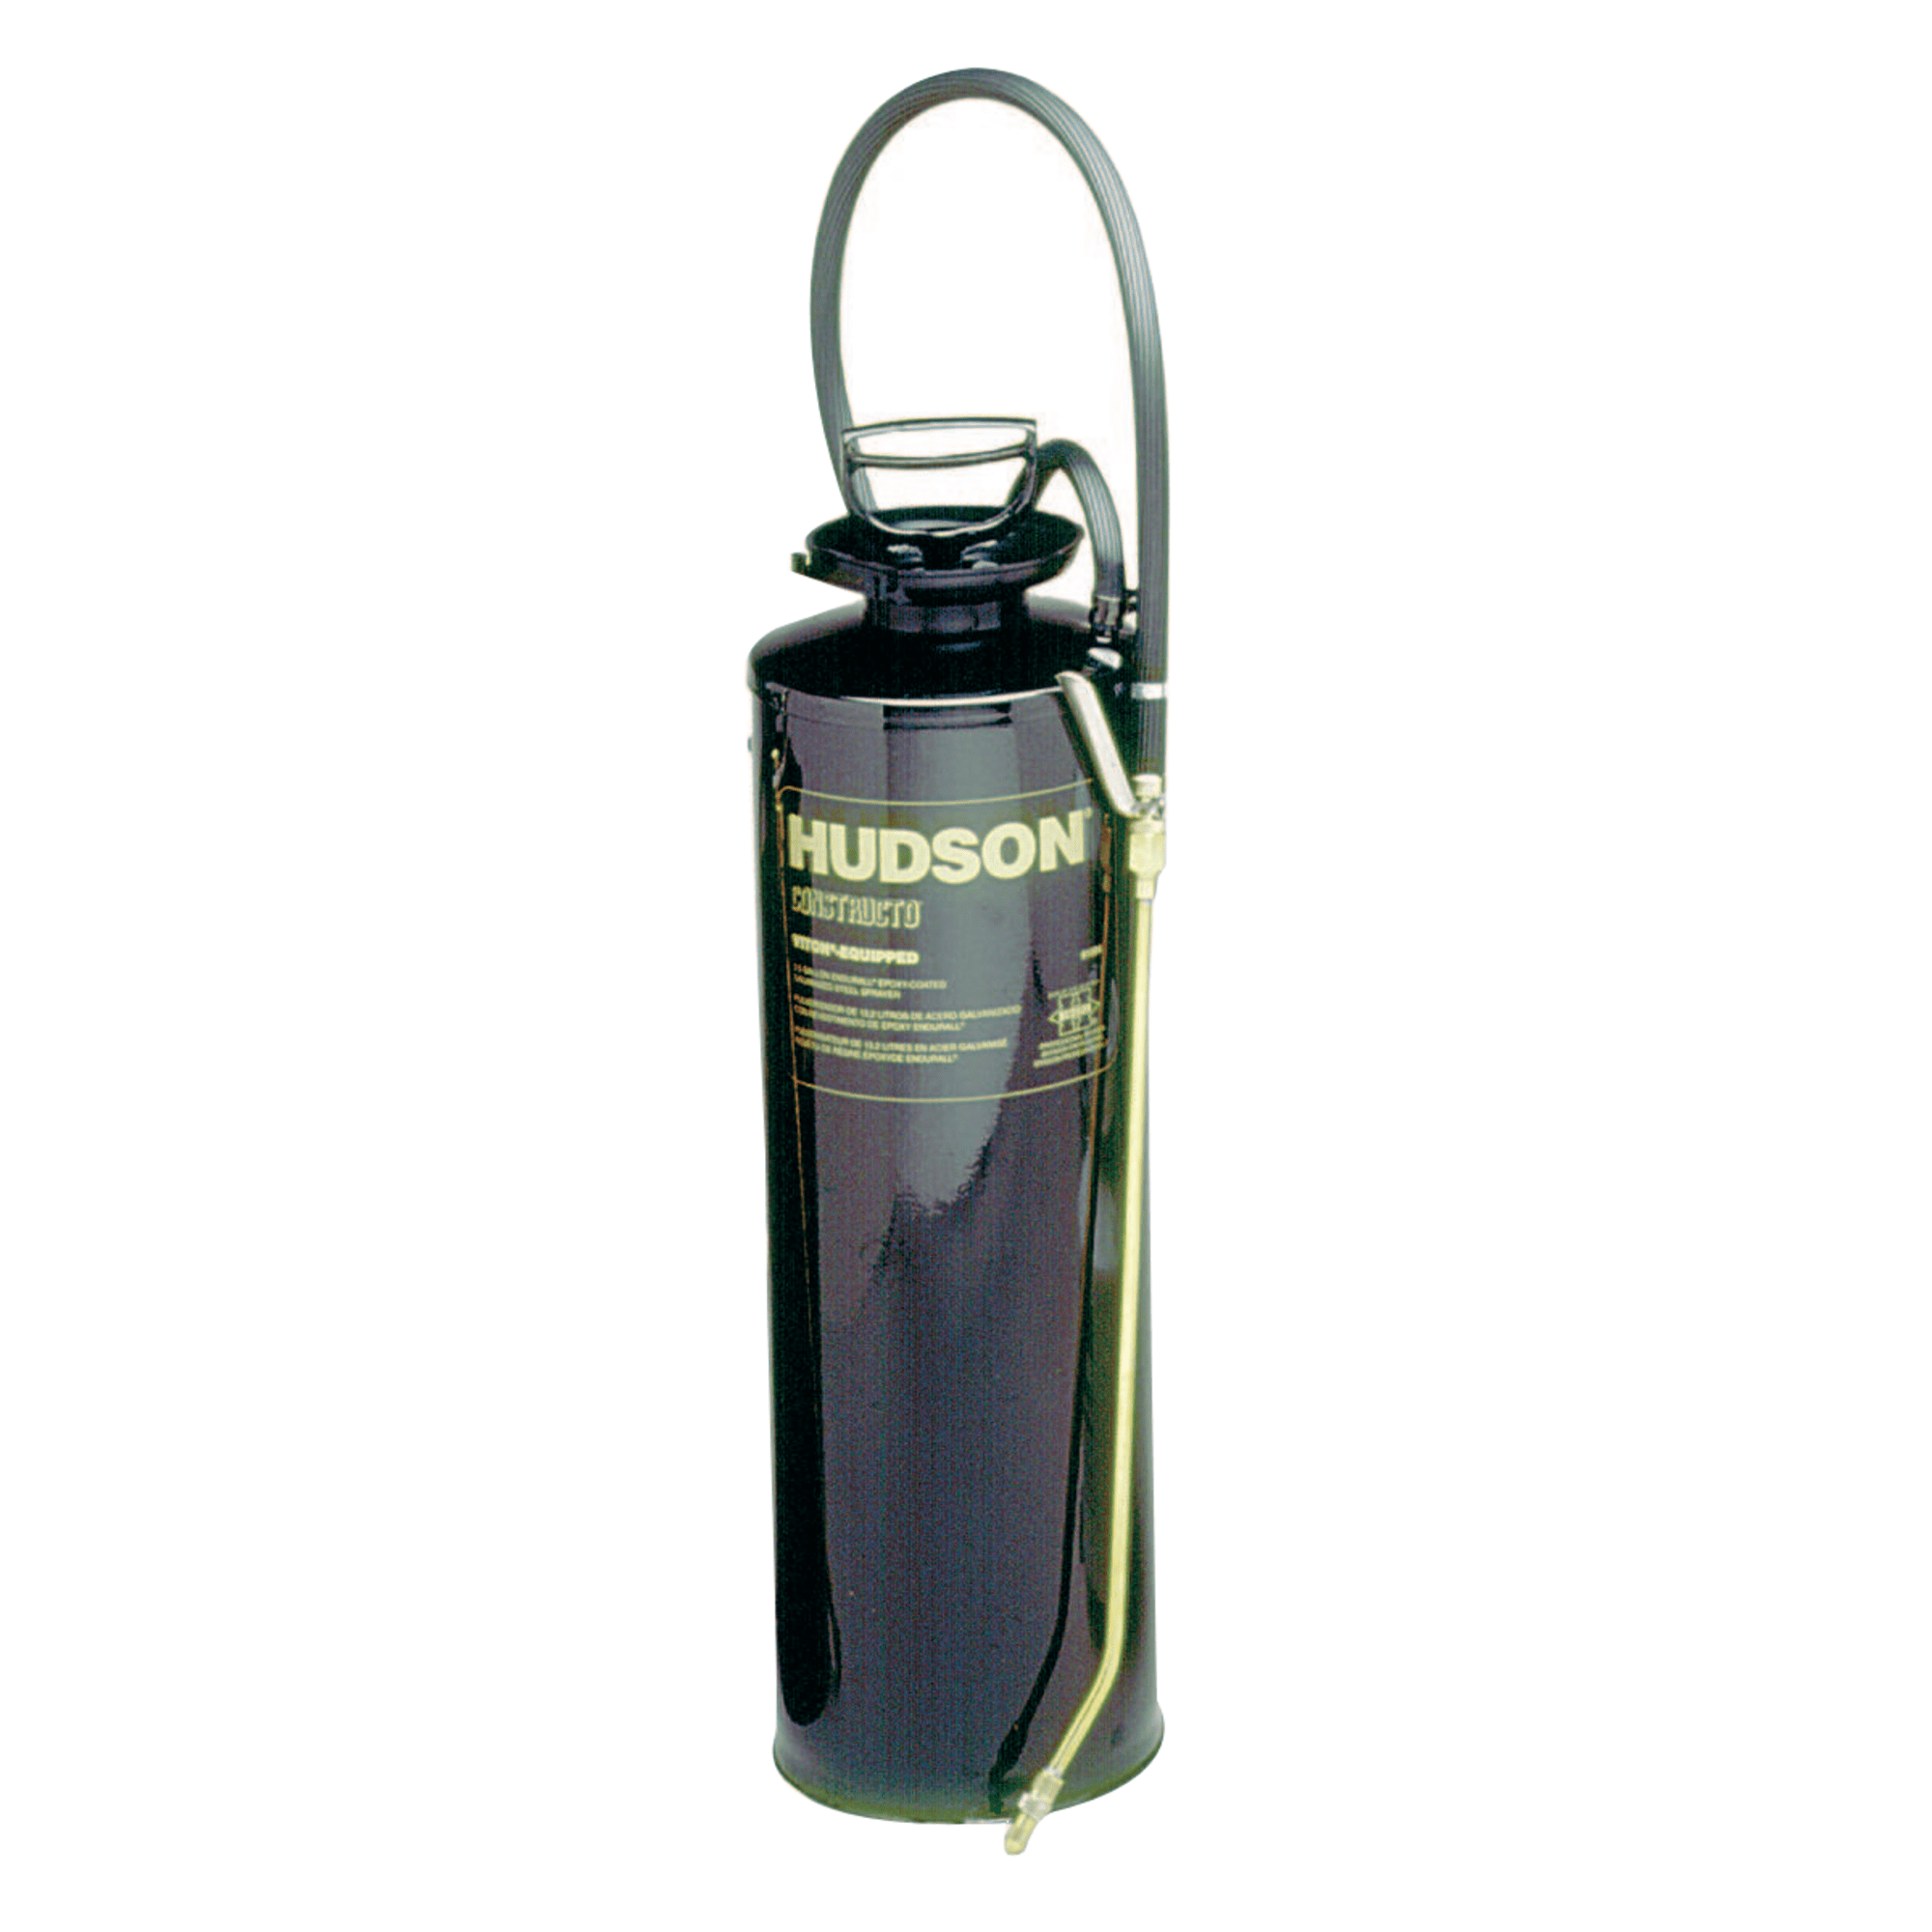 Constructo Sprayer, 2 1/2 gal, 18 in Extension, 42 in Hose - image 1 of 2